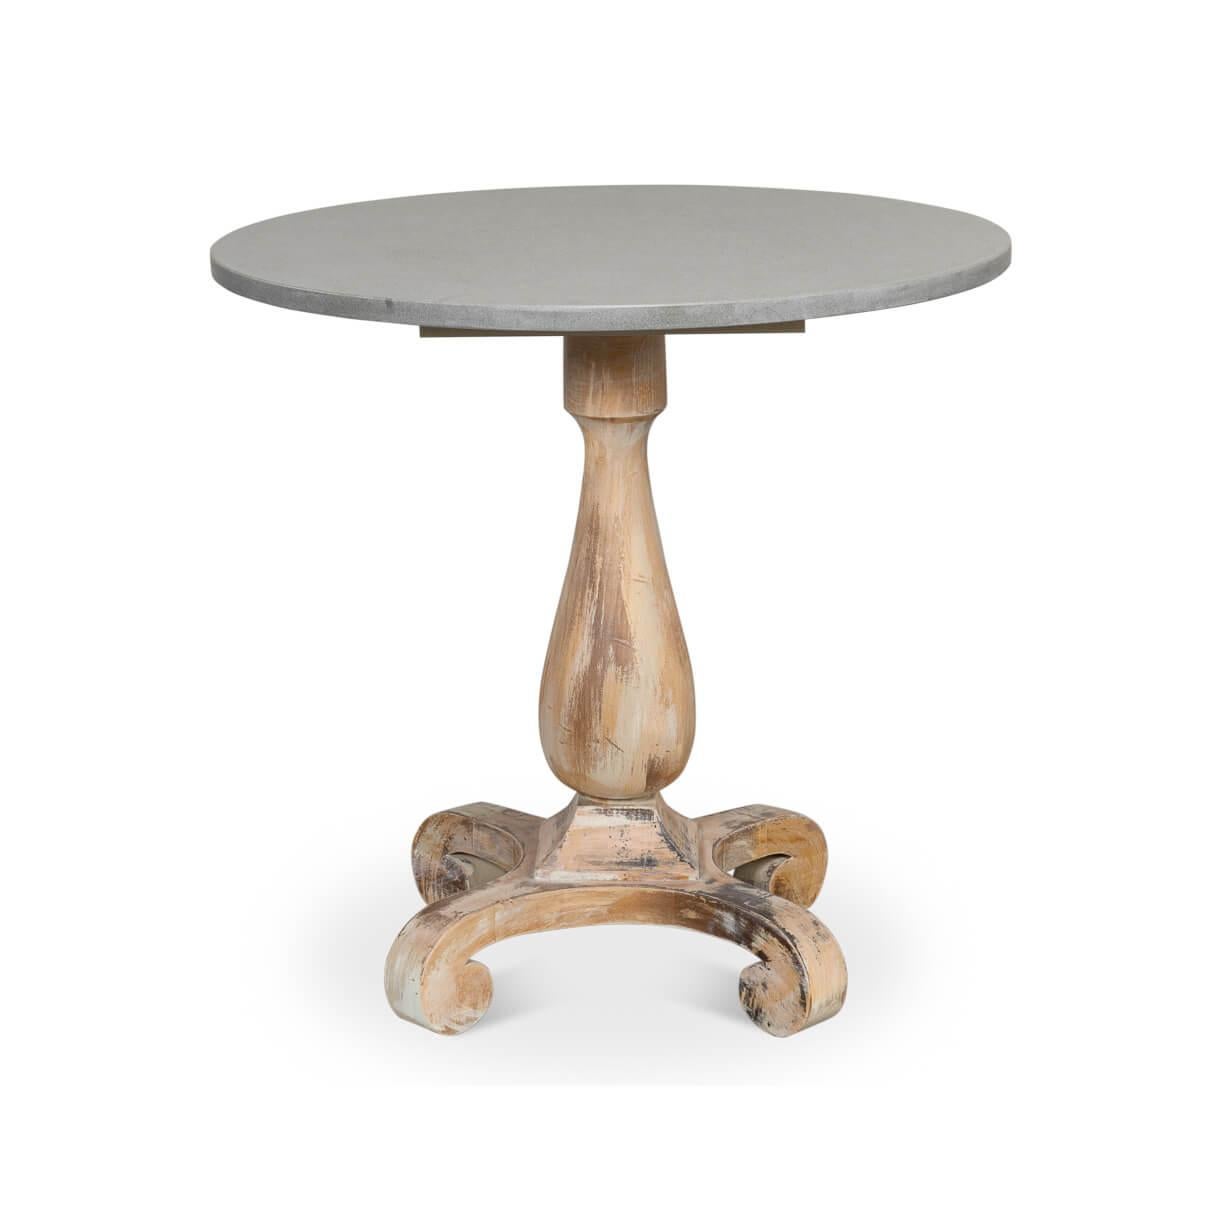 This piece embodies the charm of old-world craftsmanship meeting natural beauty. The table features an Antique Oak finish, showcasing the wood's natural grain and a story of time-honored use. The urn-shaped pedestal base stands with graceful poise,